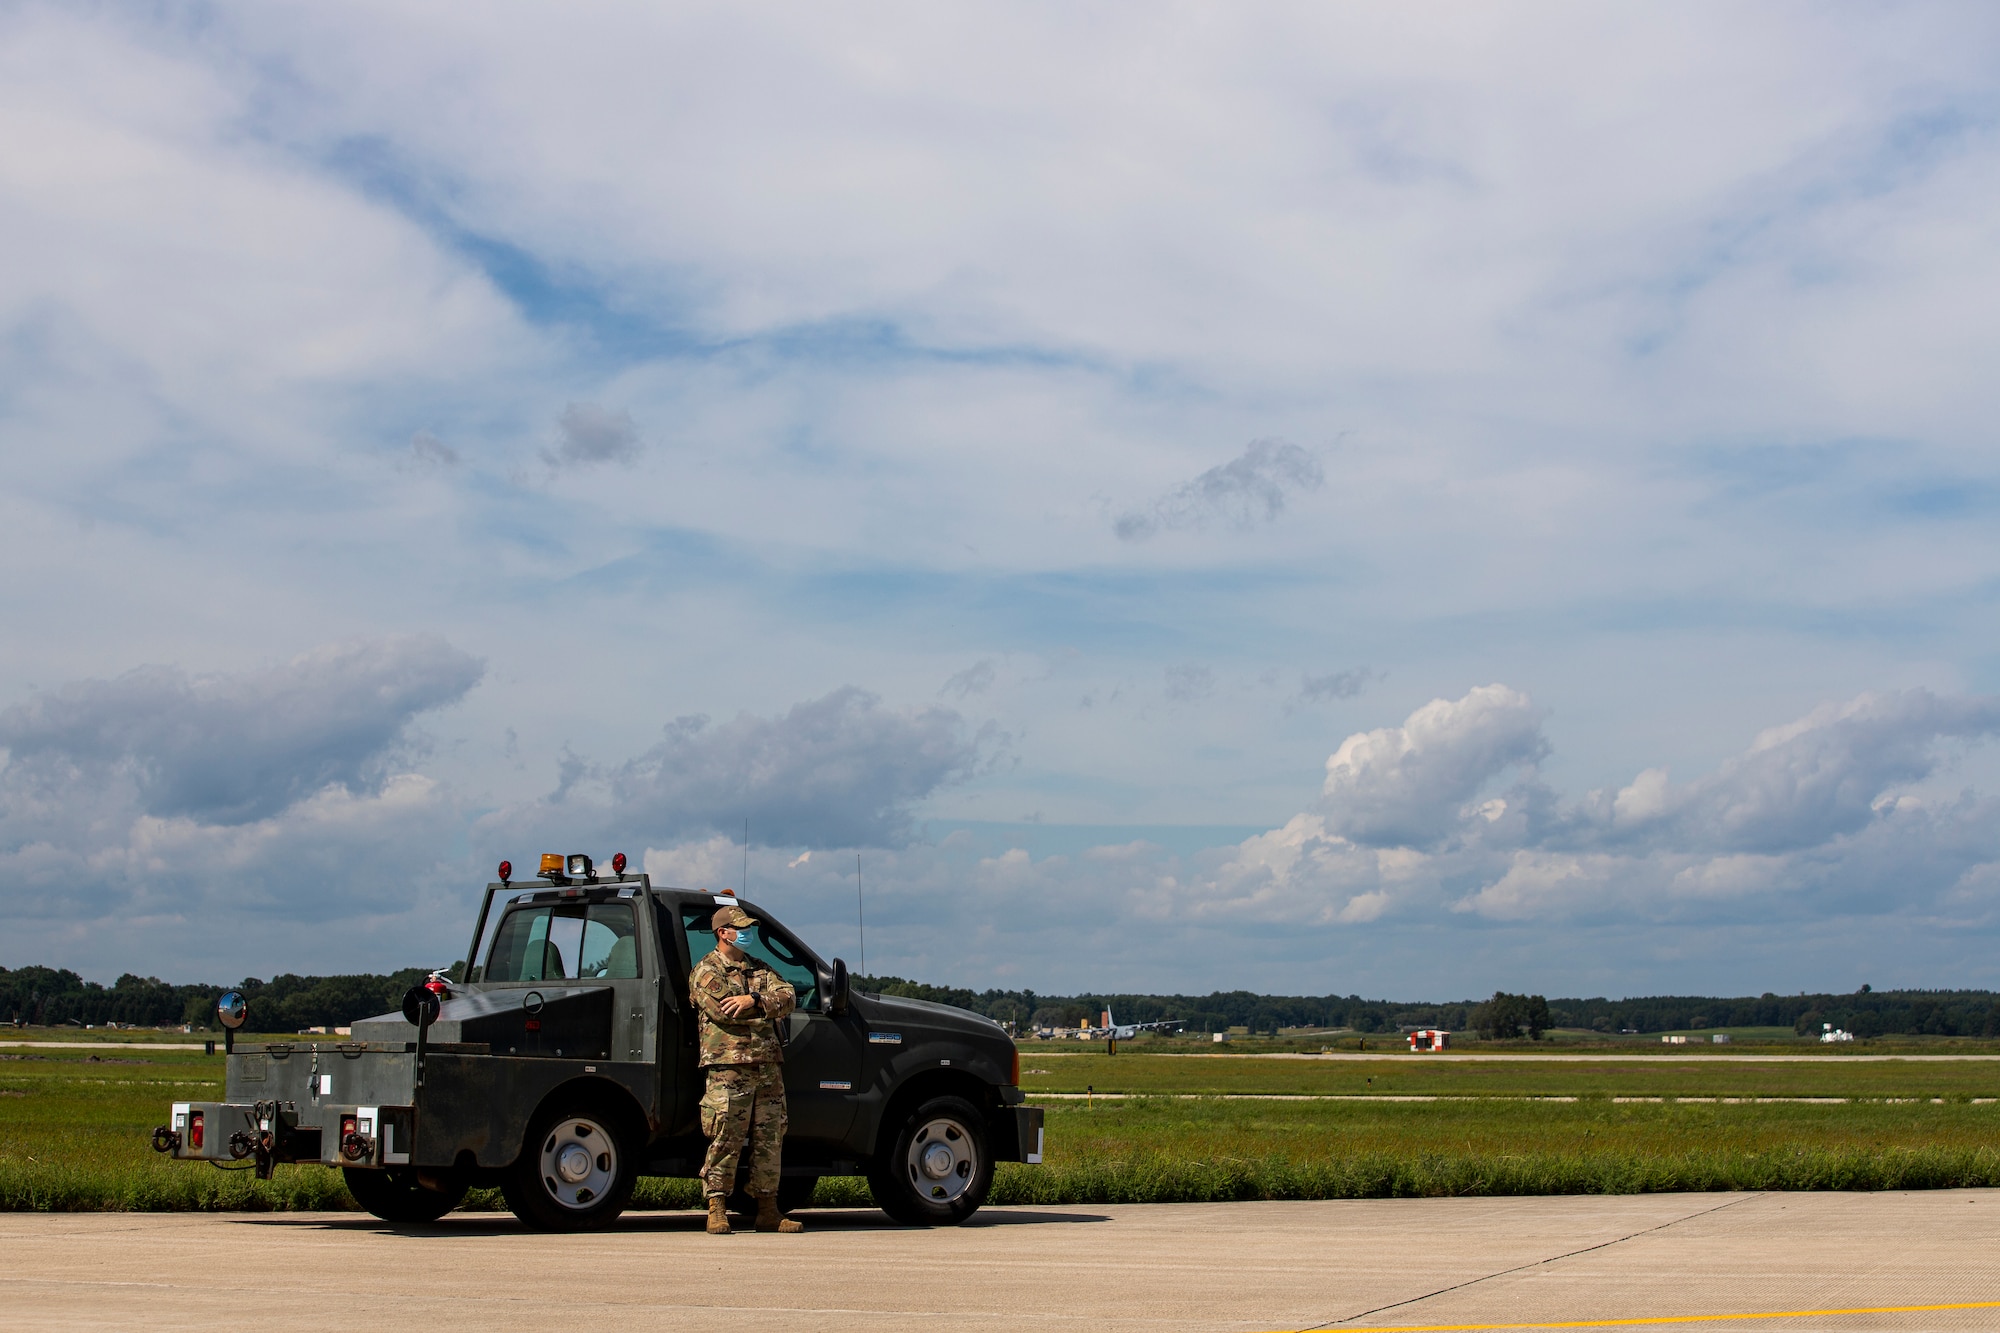 An Airman from the Kentucky Air National Guard's 123rd Contingency Response Group prepares to receive an aircraft carrying Afghan evacuees at Volk Field, Wis., Aug. 29, 2021. The Department of Defense, in support of the Department of Homeland Security and the Department of State, is providing transportation and temporary housing for evacuees as part of Operation Allies Refuge. The initiative follows through on America’s commitment to Afghan personnel who have helped the United States, and provides them essential support at secure locations outside Afghanistan. (U.S. Army photo by Spc. Rhianna Ballenger, 55th Signal Company)